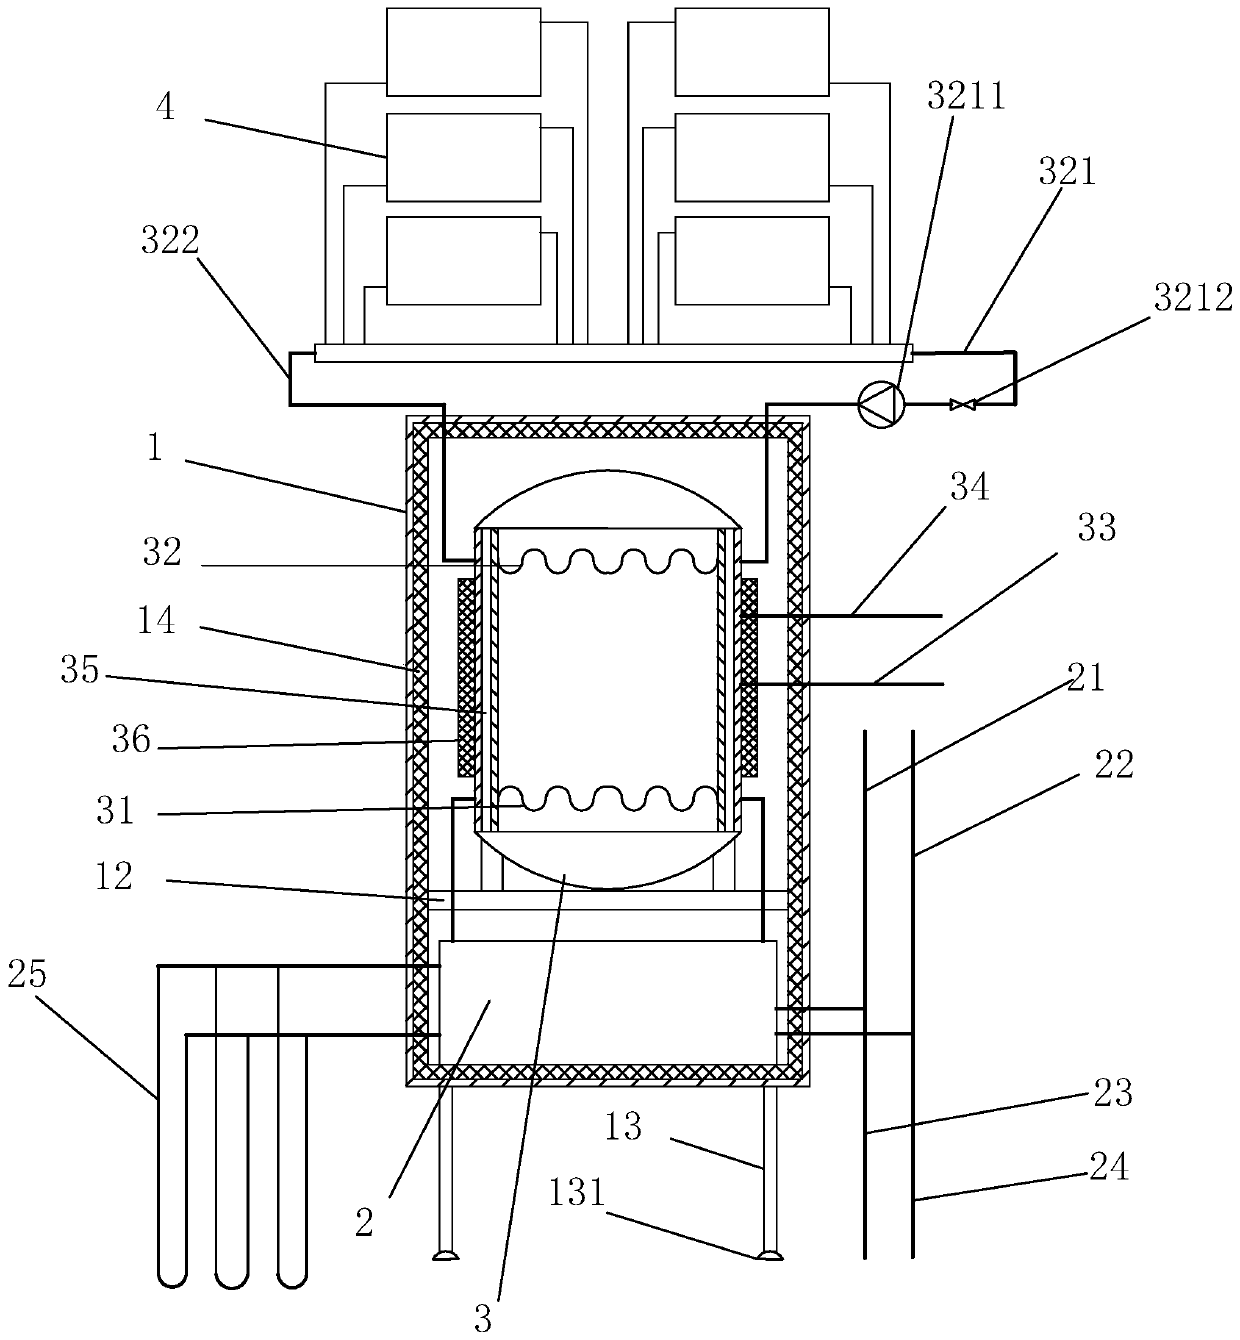 Heat pump circulation system with water tank